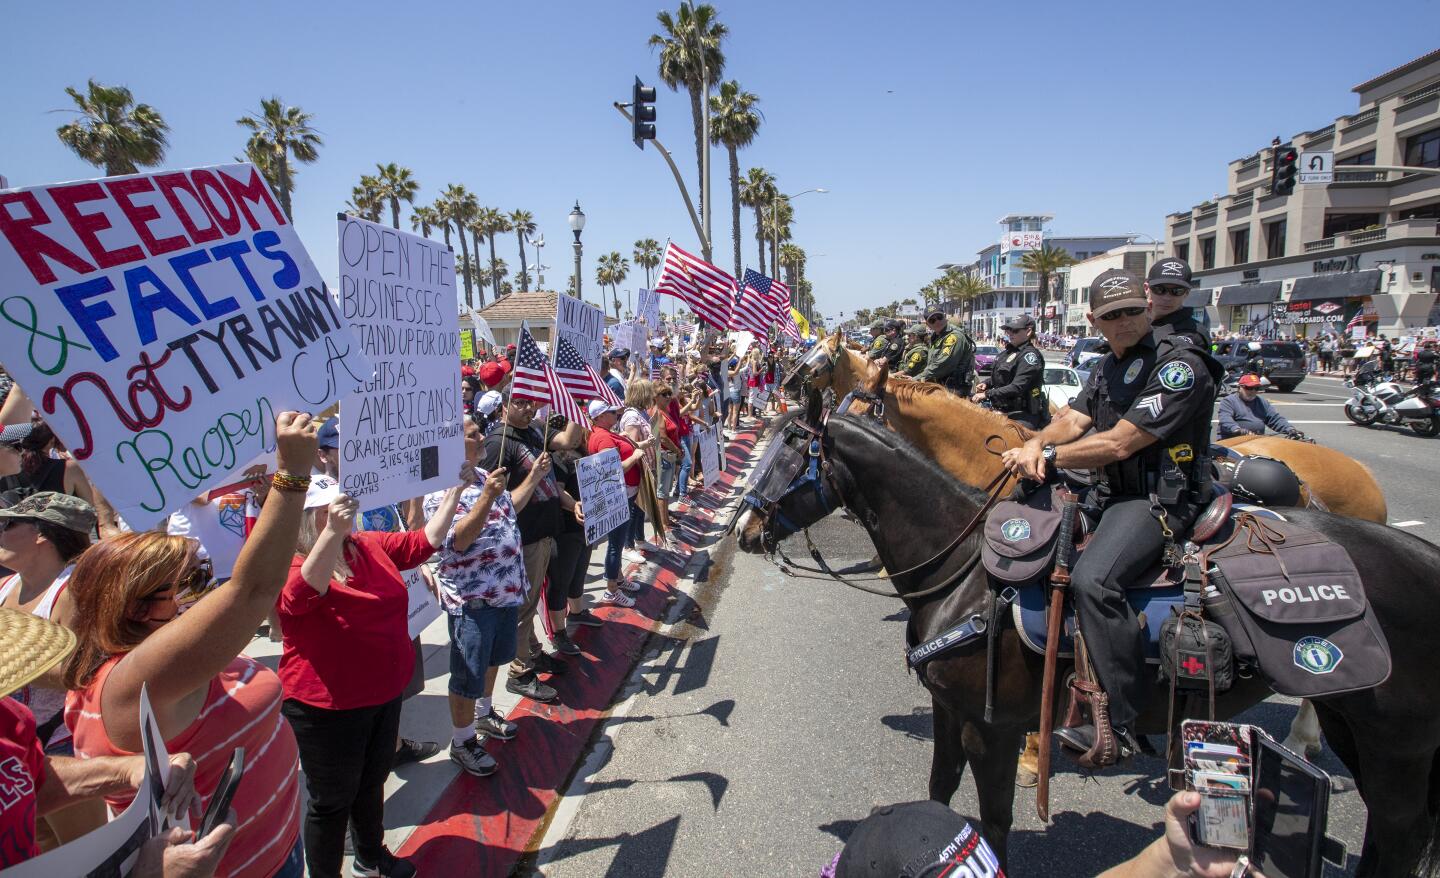 Police line up to keep protesters on the sidewalk in Huntington Beach